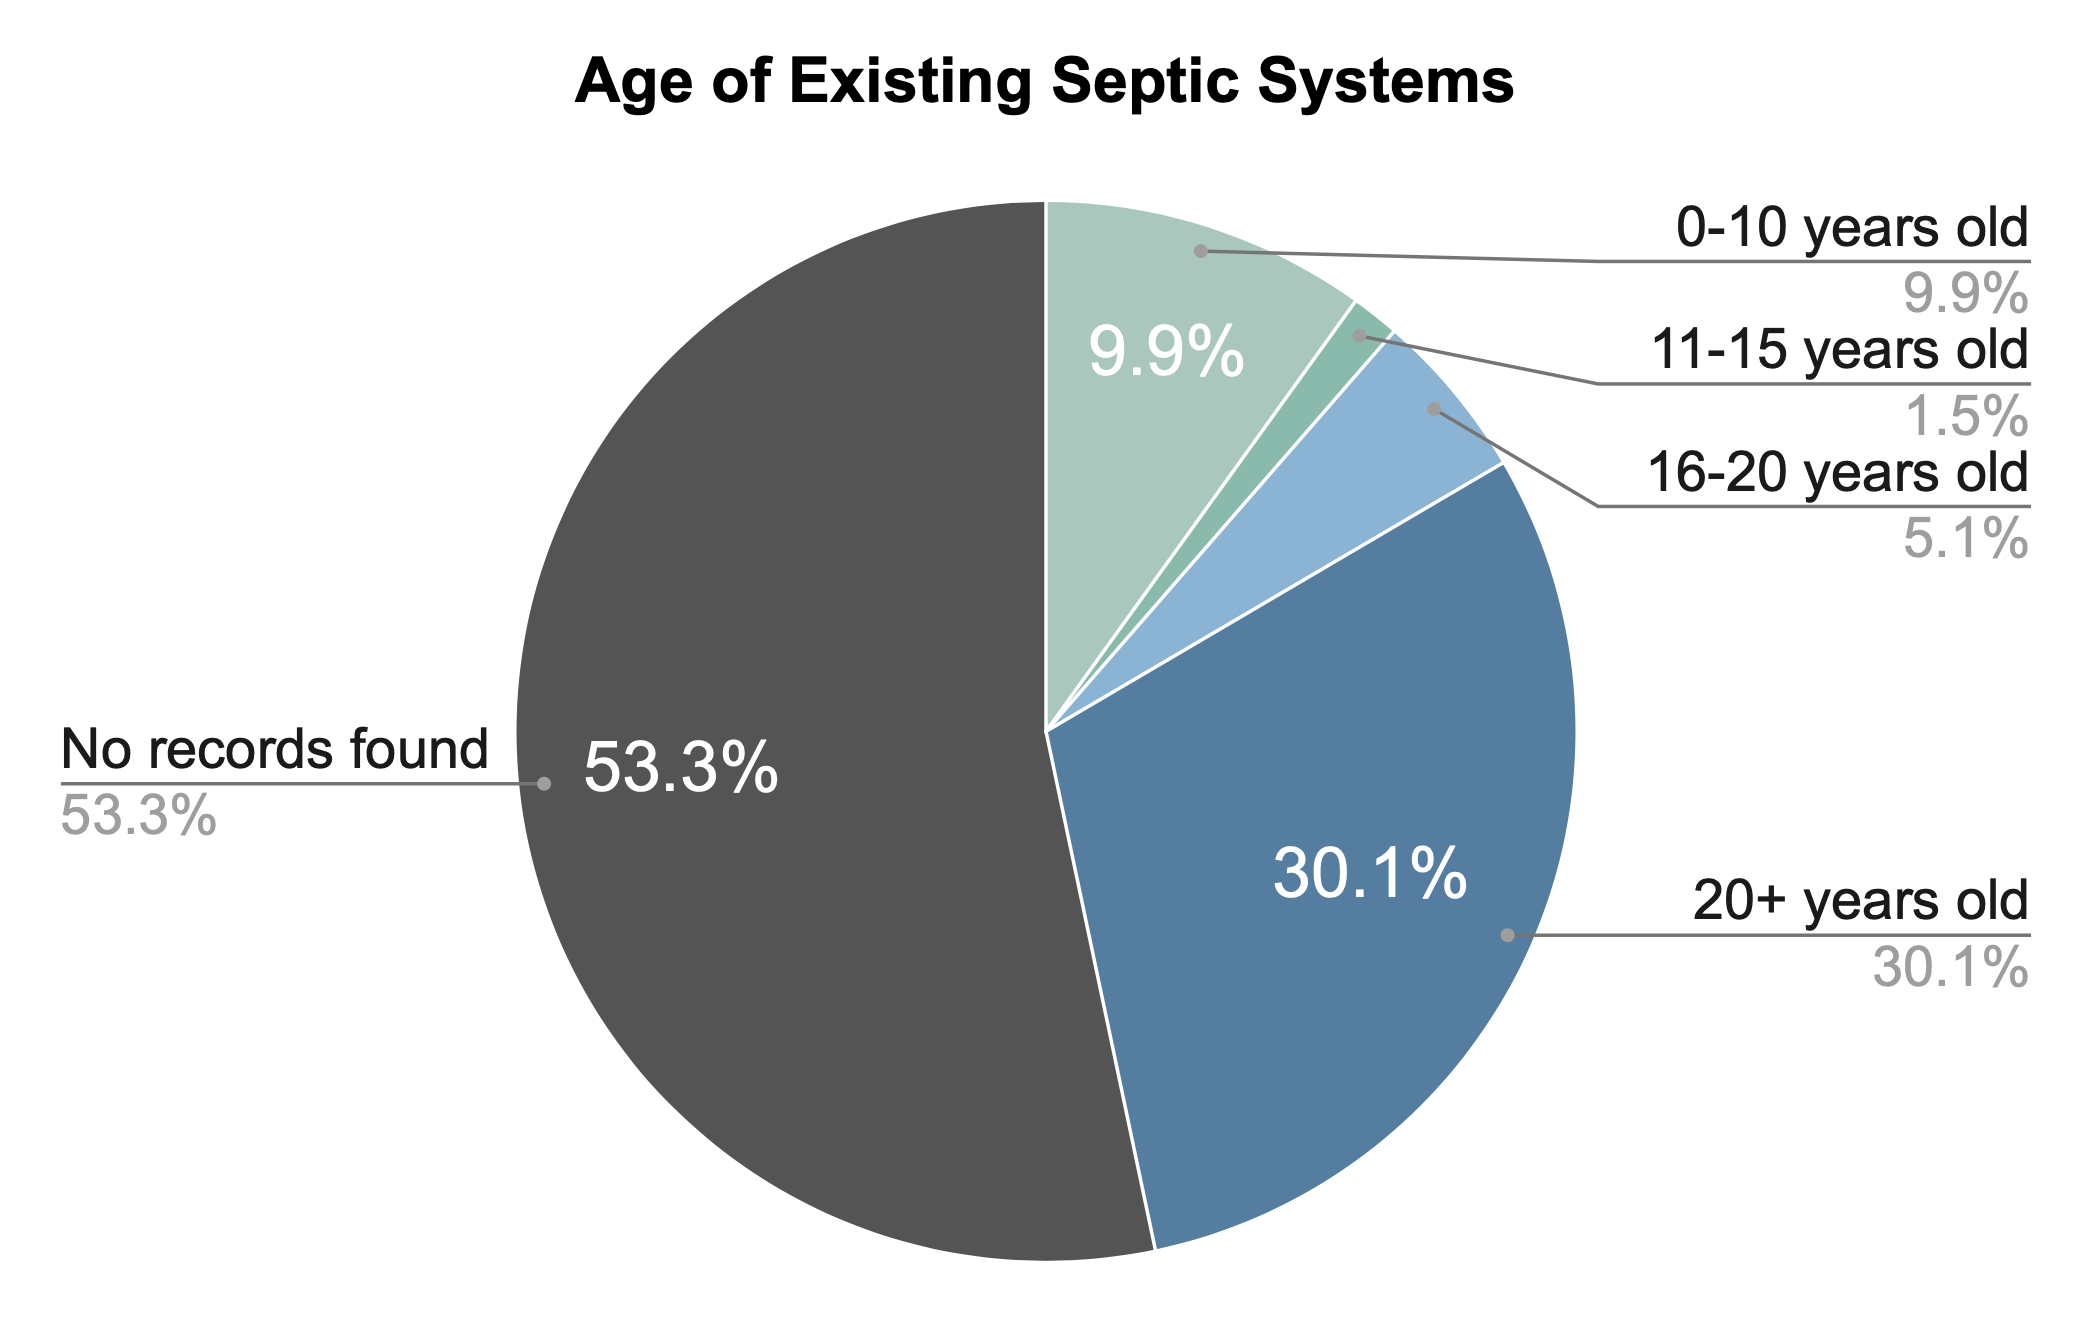 pie chart showing the percent of systems of a given age range